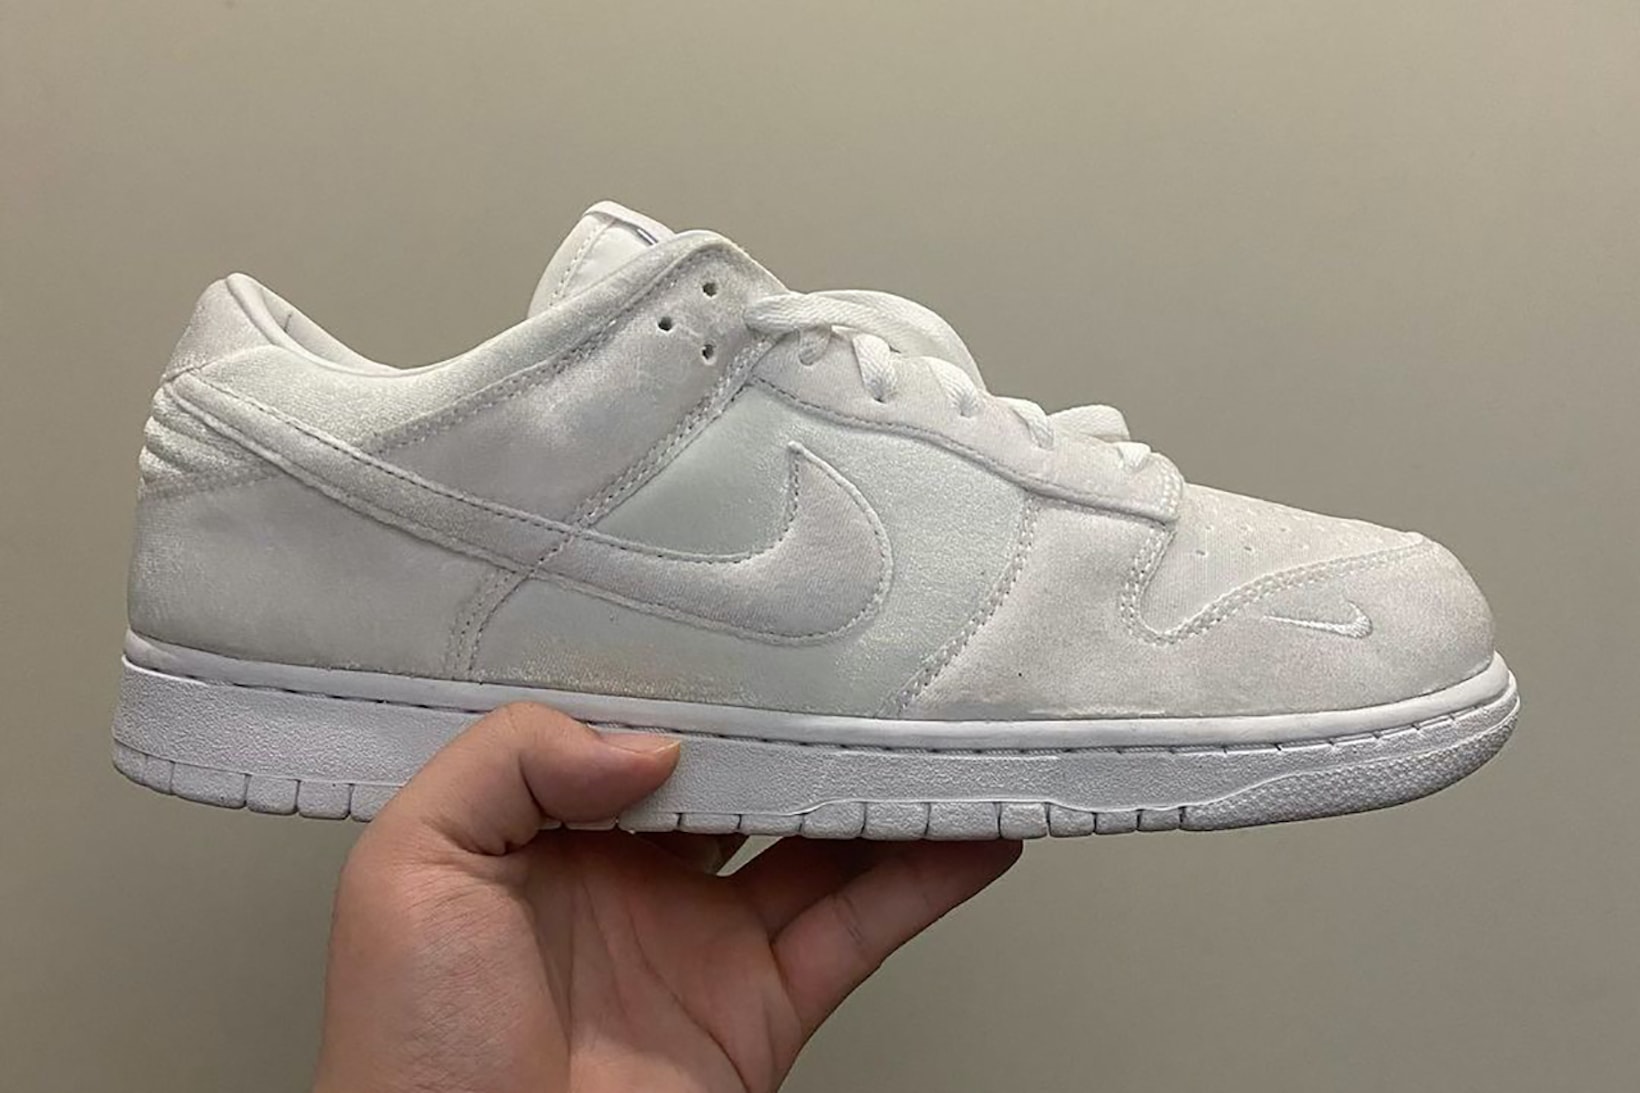 These White Nike Shoes Are an Optical Illusion